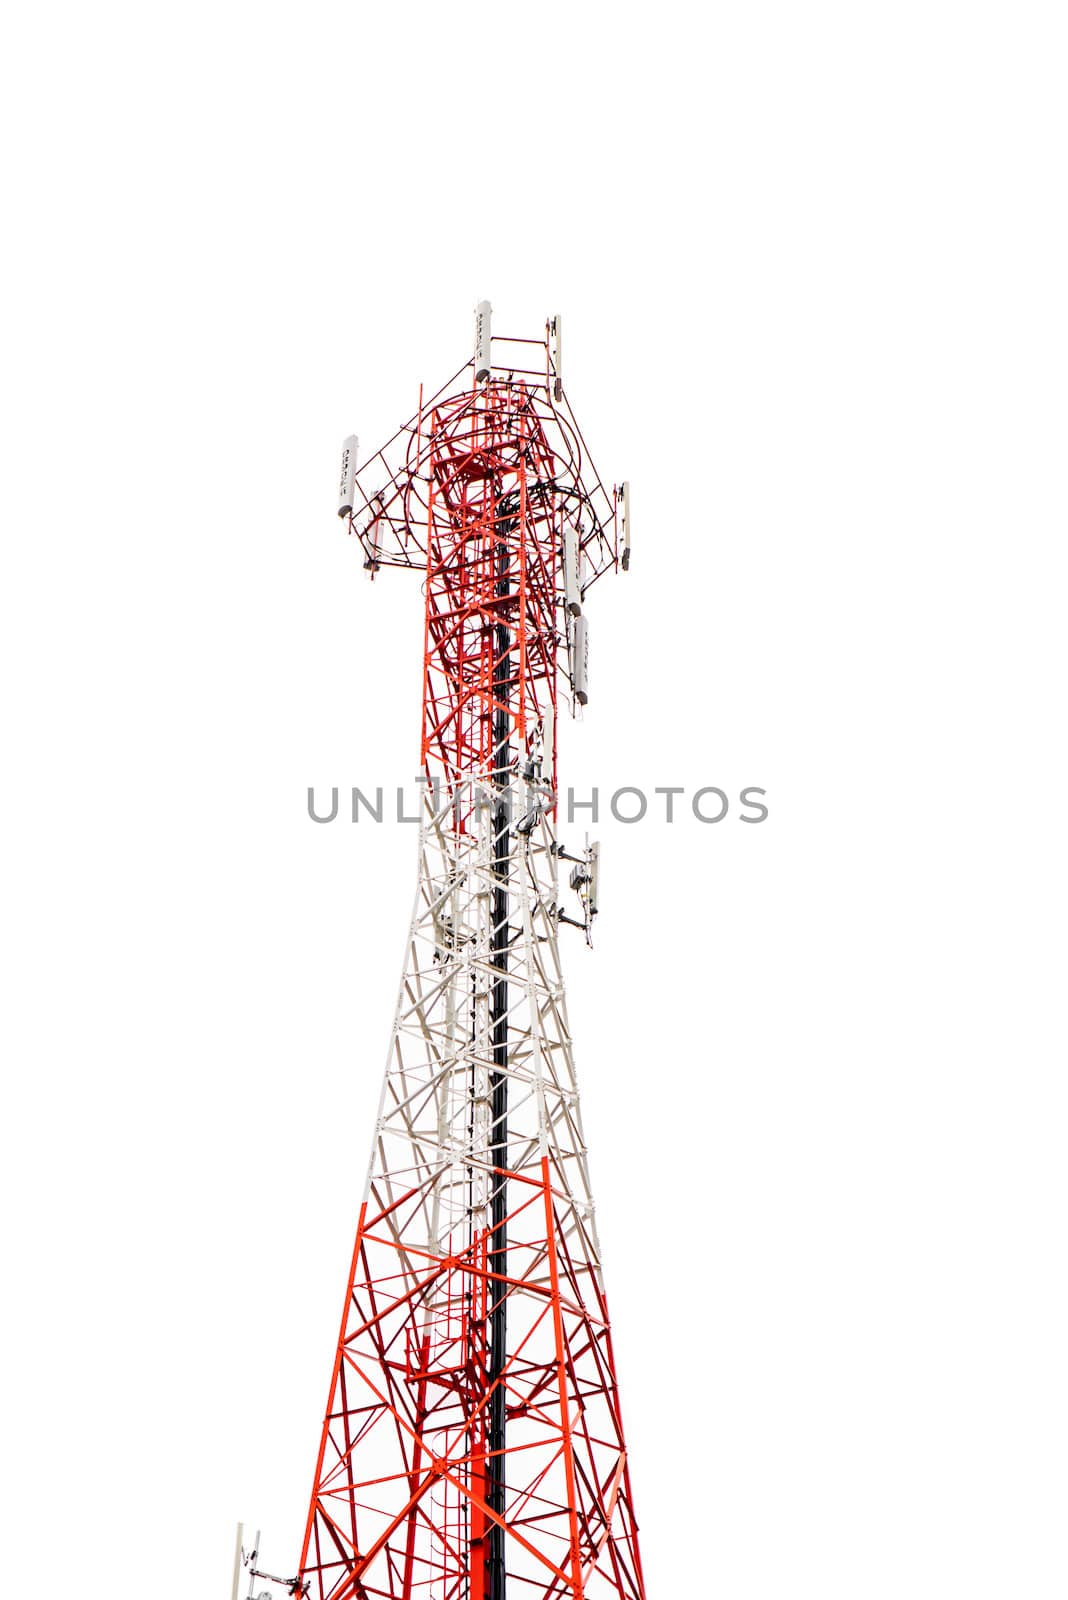 Mobile phone communication antenna tower isolated on white